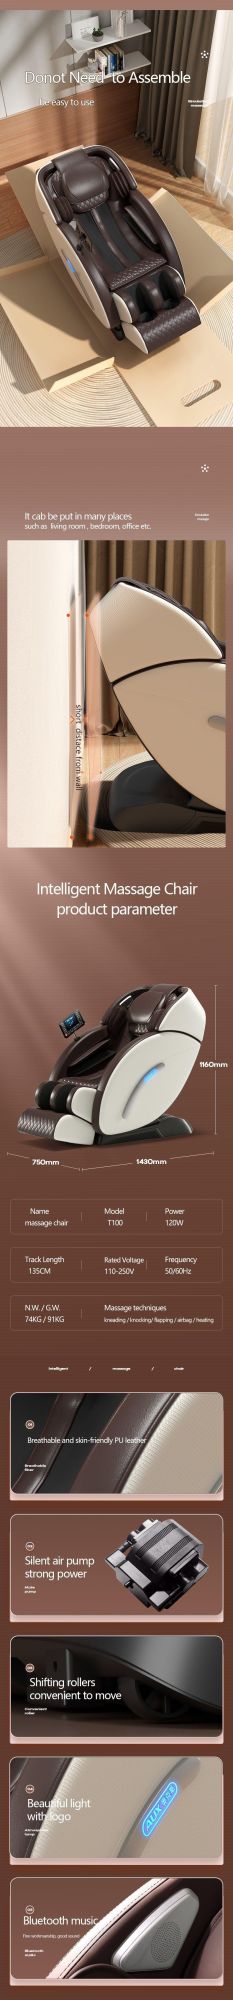 Sauron T100 2022 Electric SL Track Massaging Chair Recliner Full Body Massage Chair